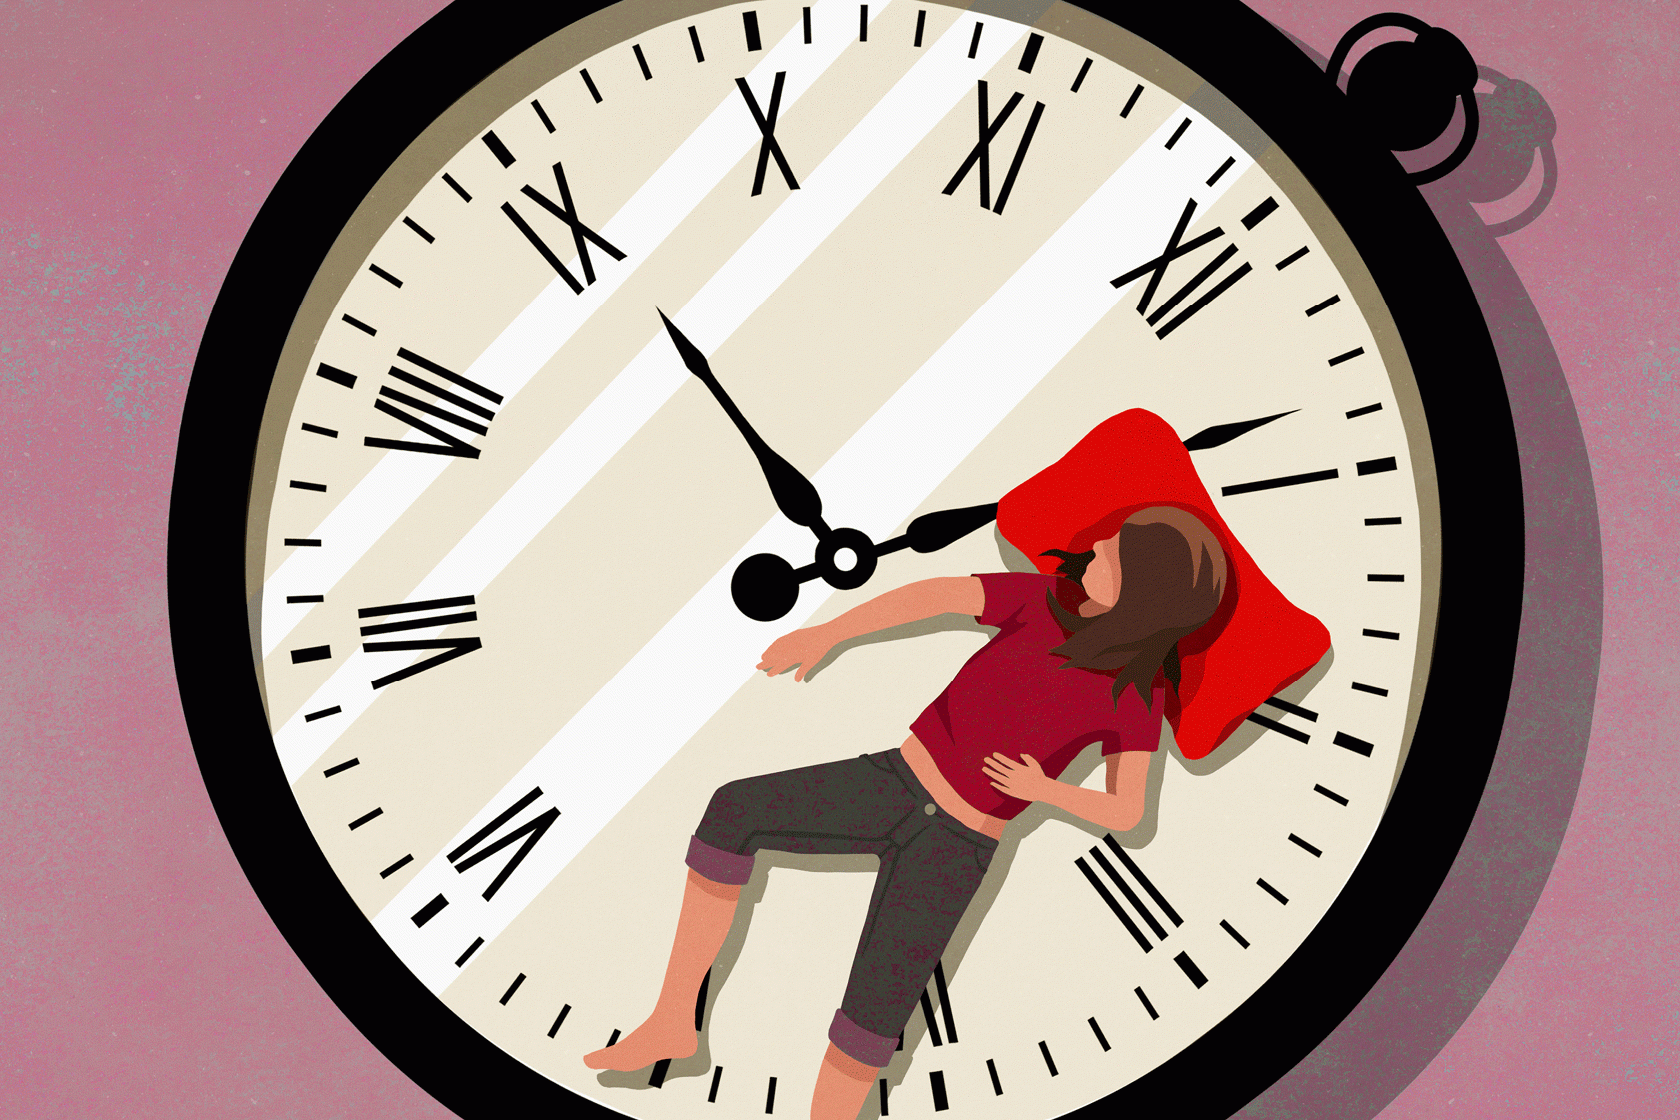 Illustration of a woman sleeping on a clock